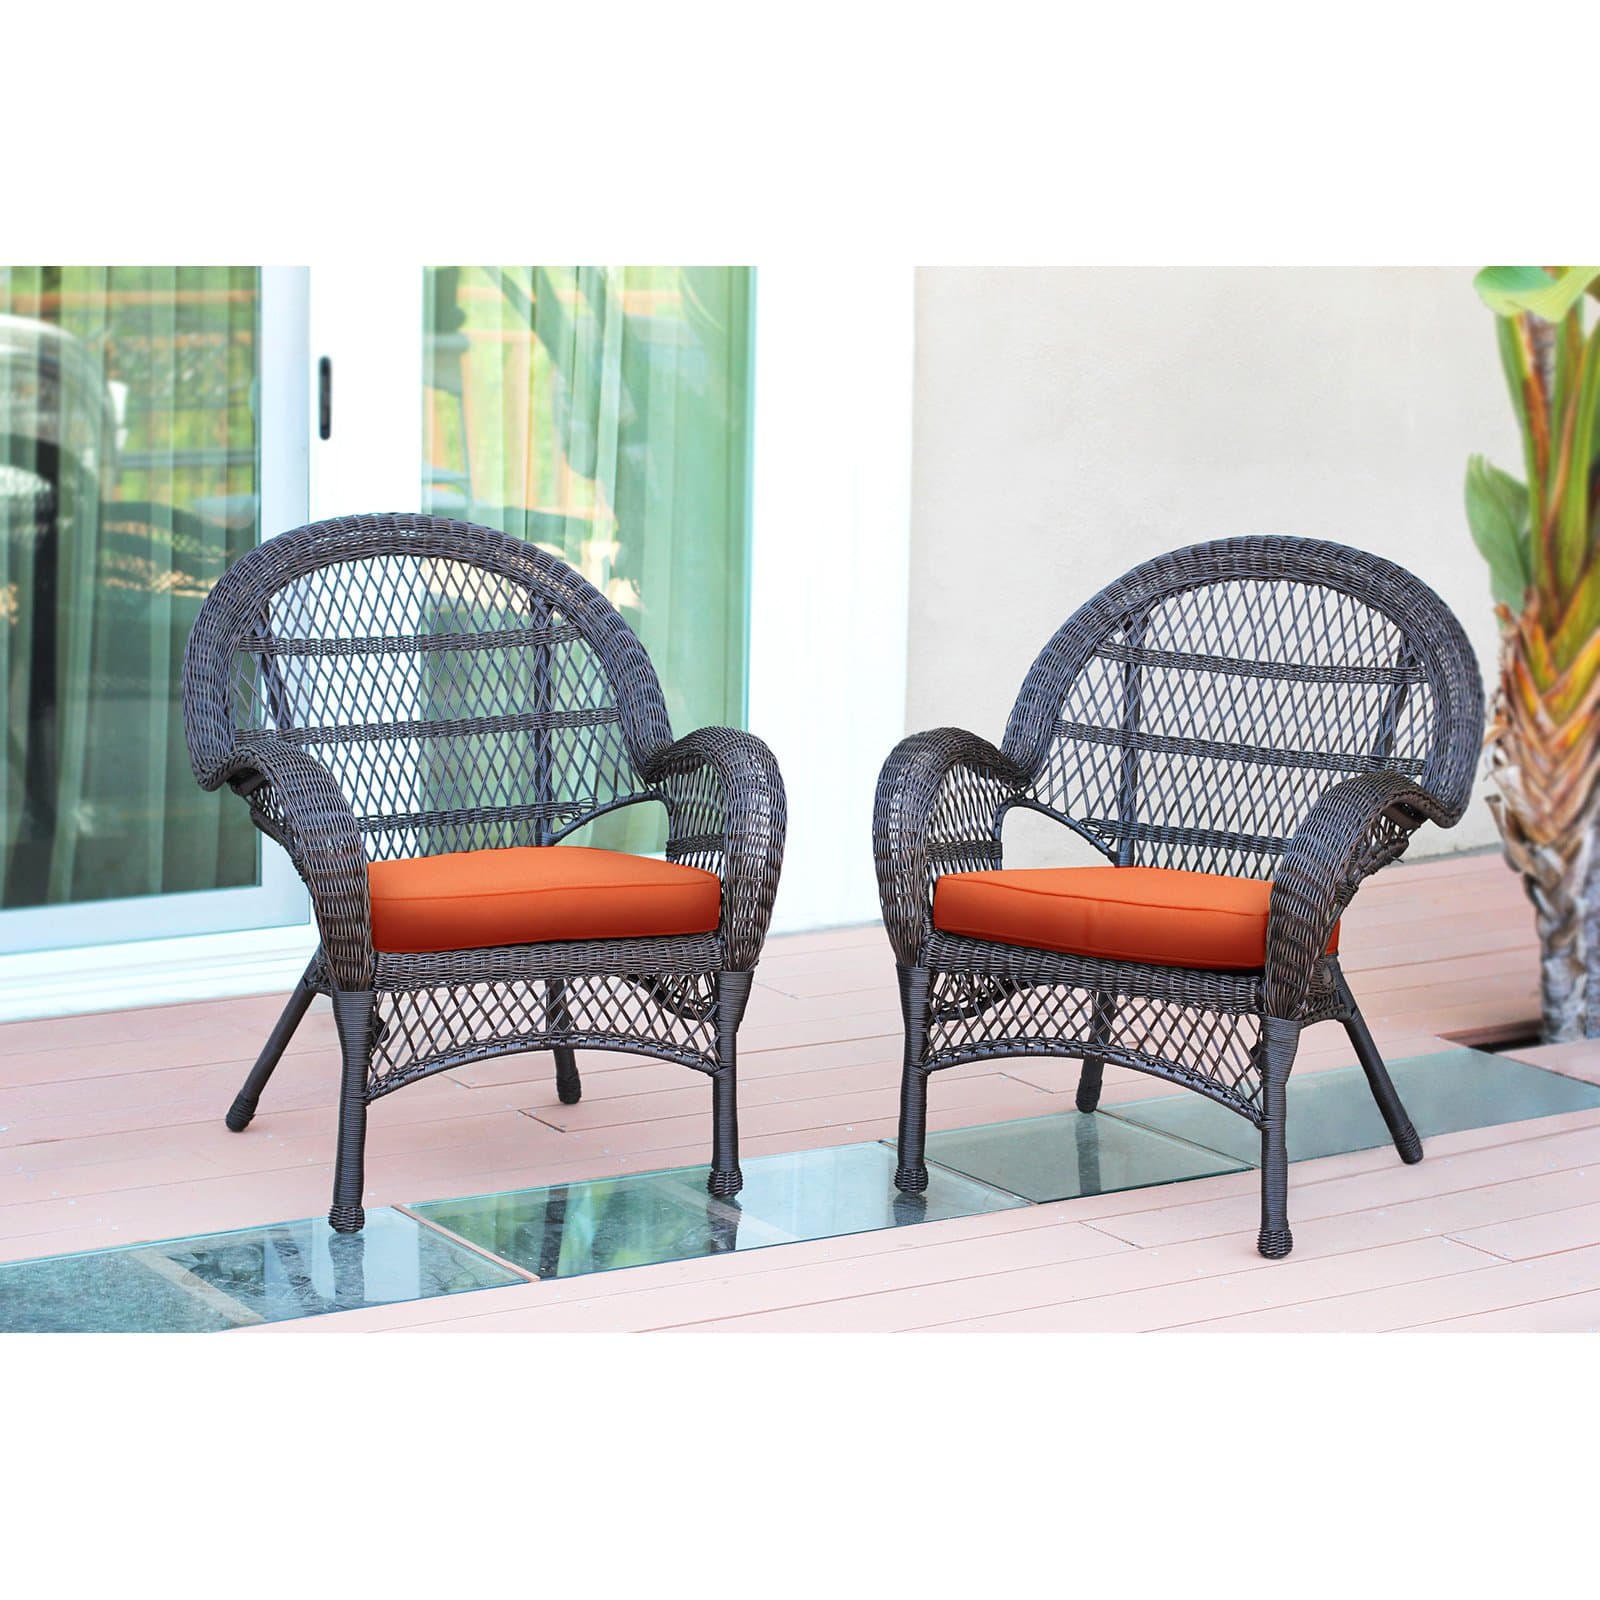 Jeco Santa Maria Wicker Patio Chairs with Optional Cushion - Set of 2 - image 4 of 11